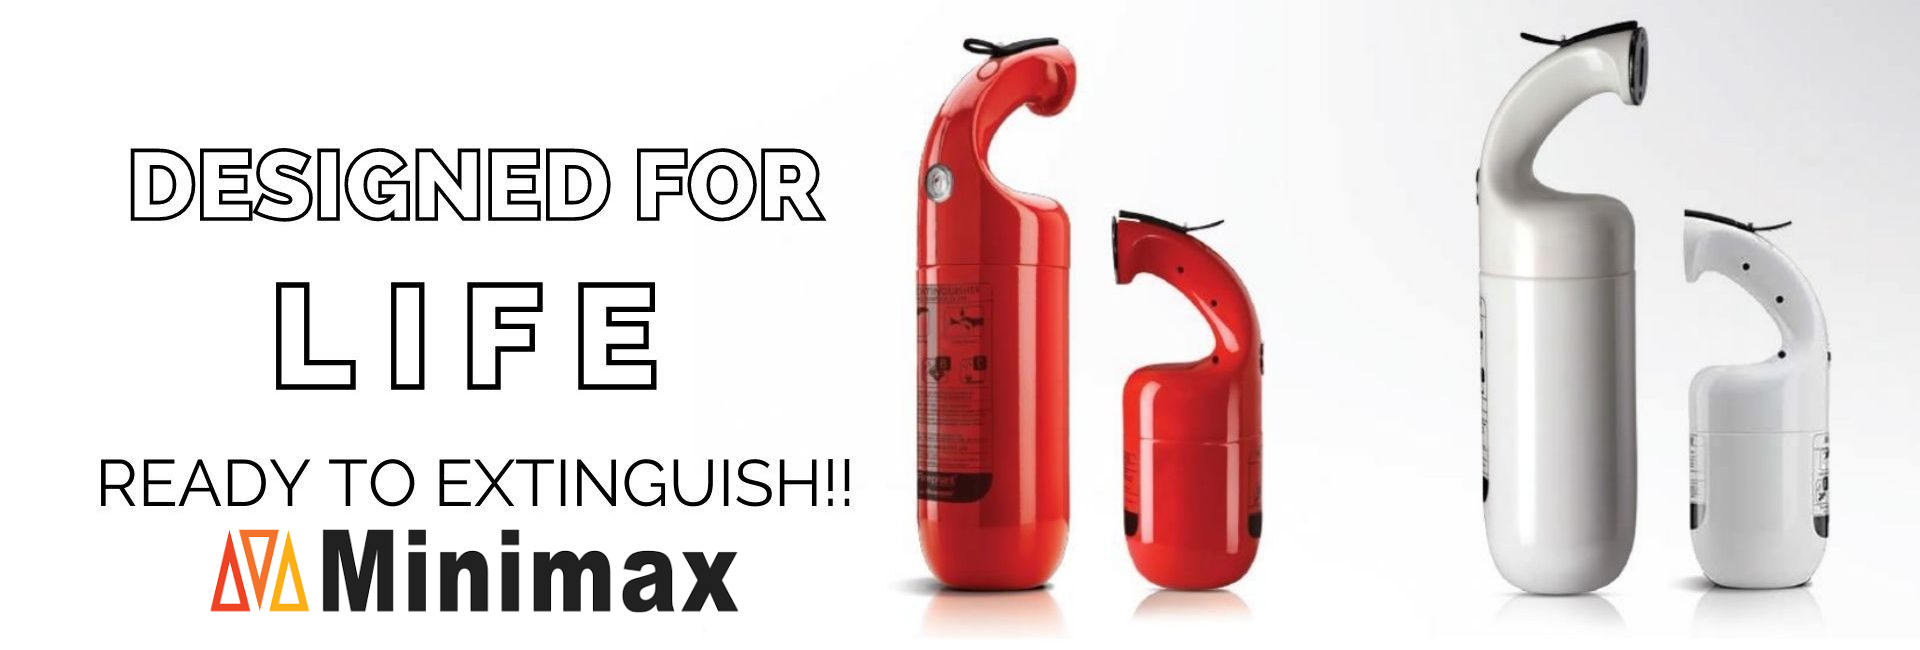 Fire Extinguishers Banner